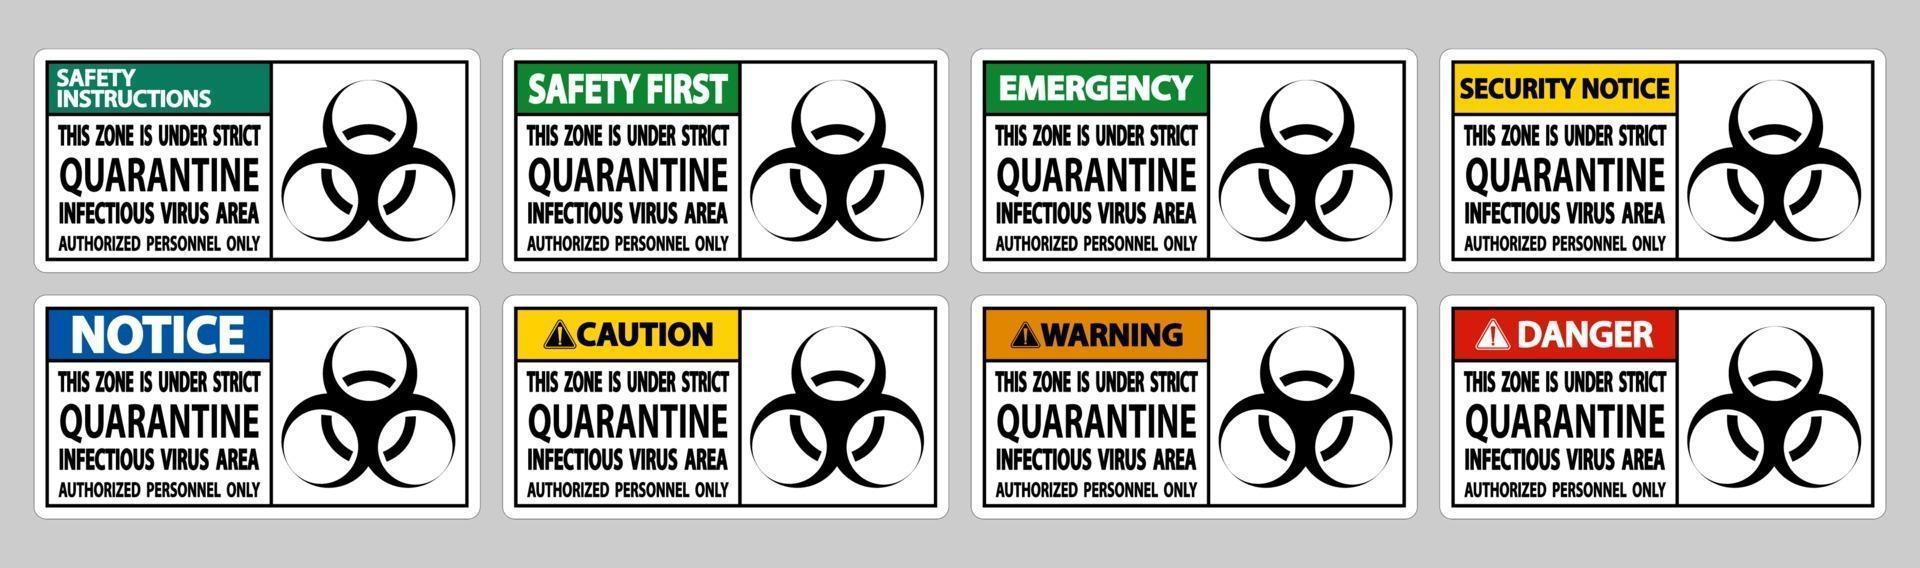 Quarantine Infectious Virus Area Sign Isolate On White Background,Vector Illustration EPS.10 vector